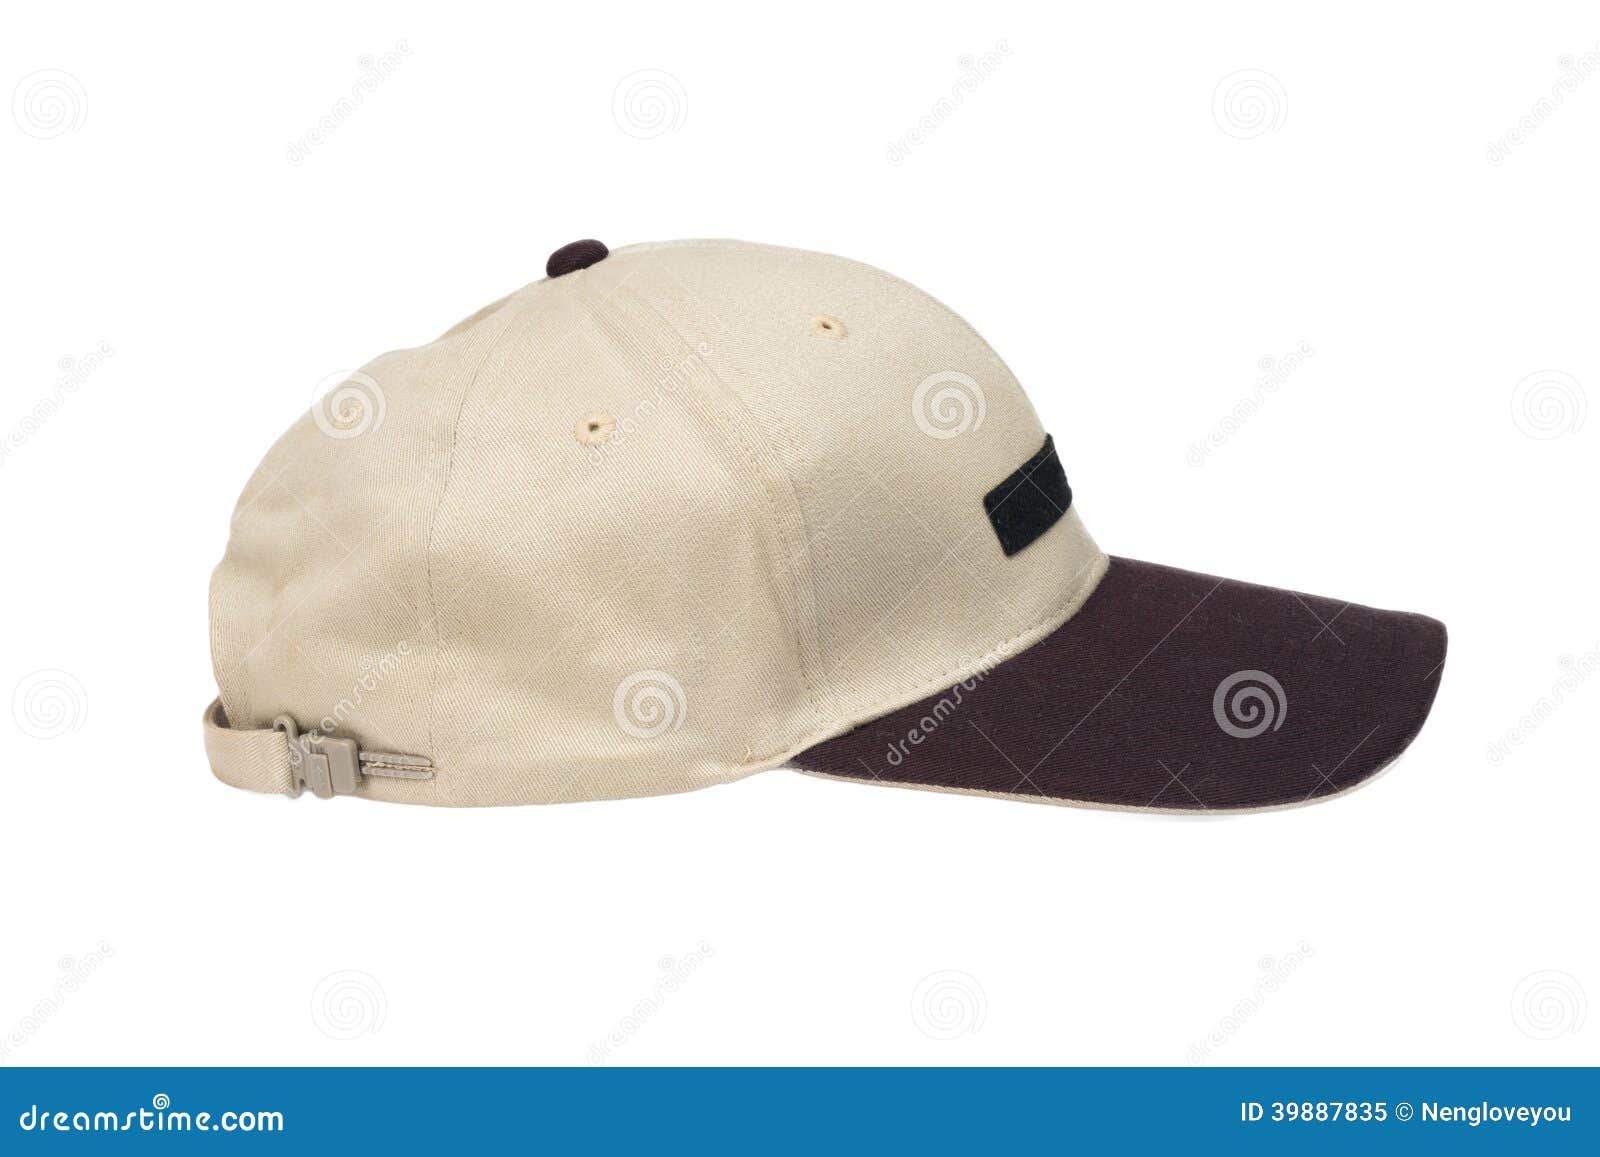 Brown Two Tone Baseball Caps Stock Image - Image of sport, view: 39887835